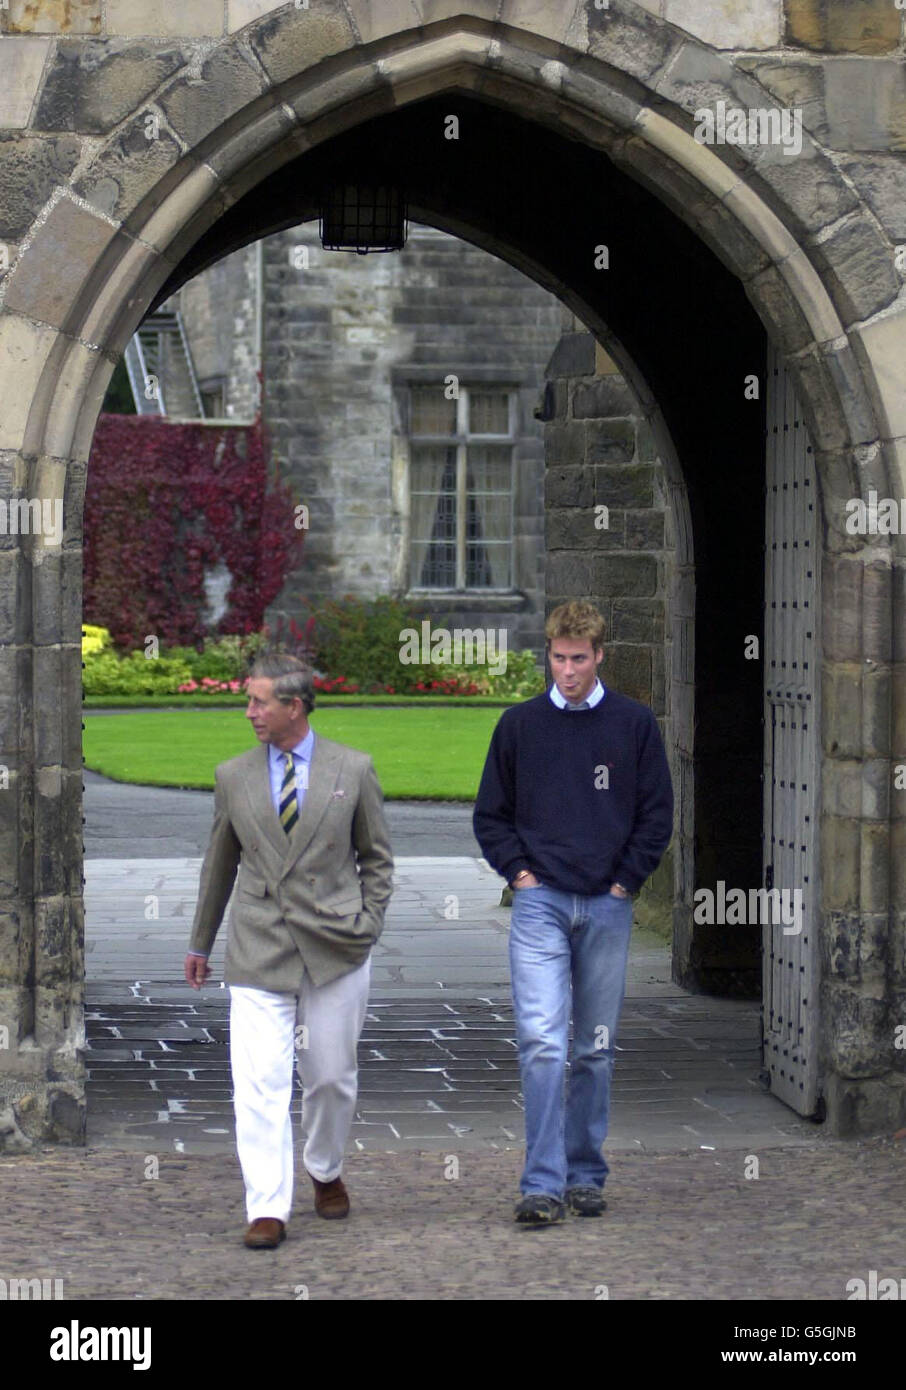 Prince William arriving at St. Andrews University, St. Andrews, Scotland, where he is to study an art history degree. He was accompanied by his father Prince Charles, The Duke of Rothesay. Stock Photo